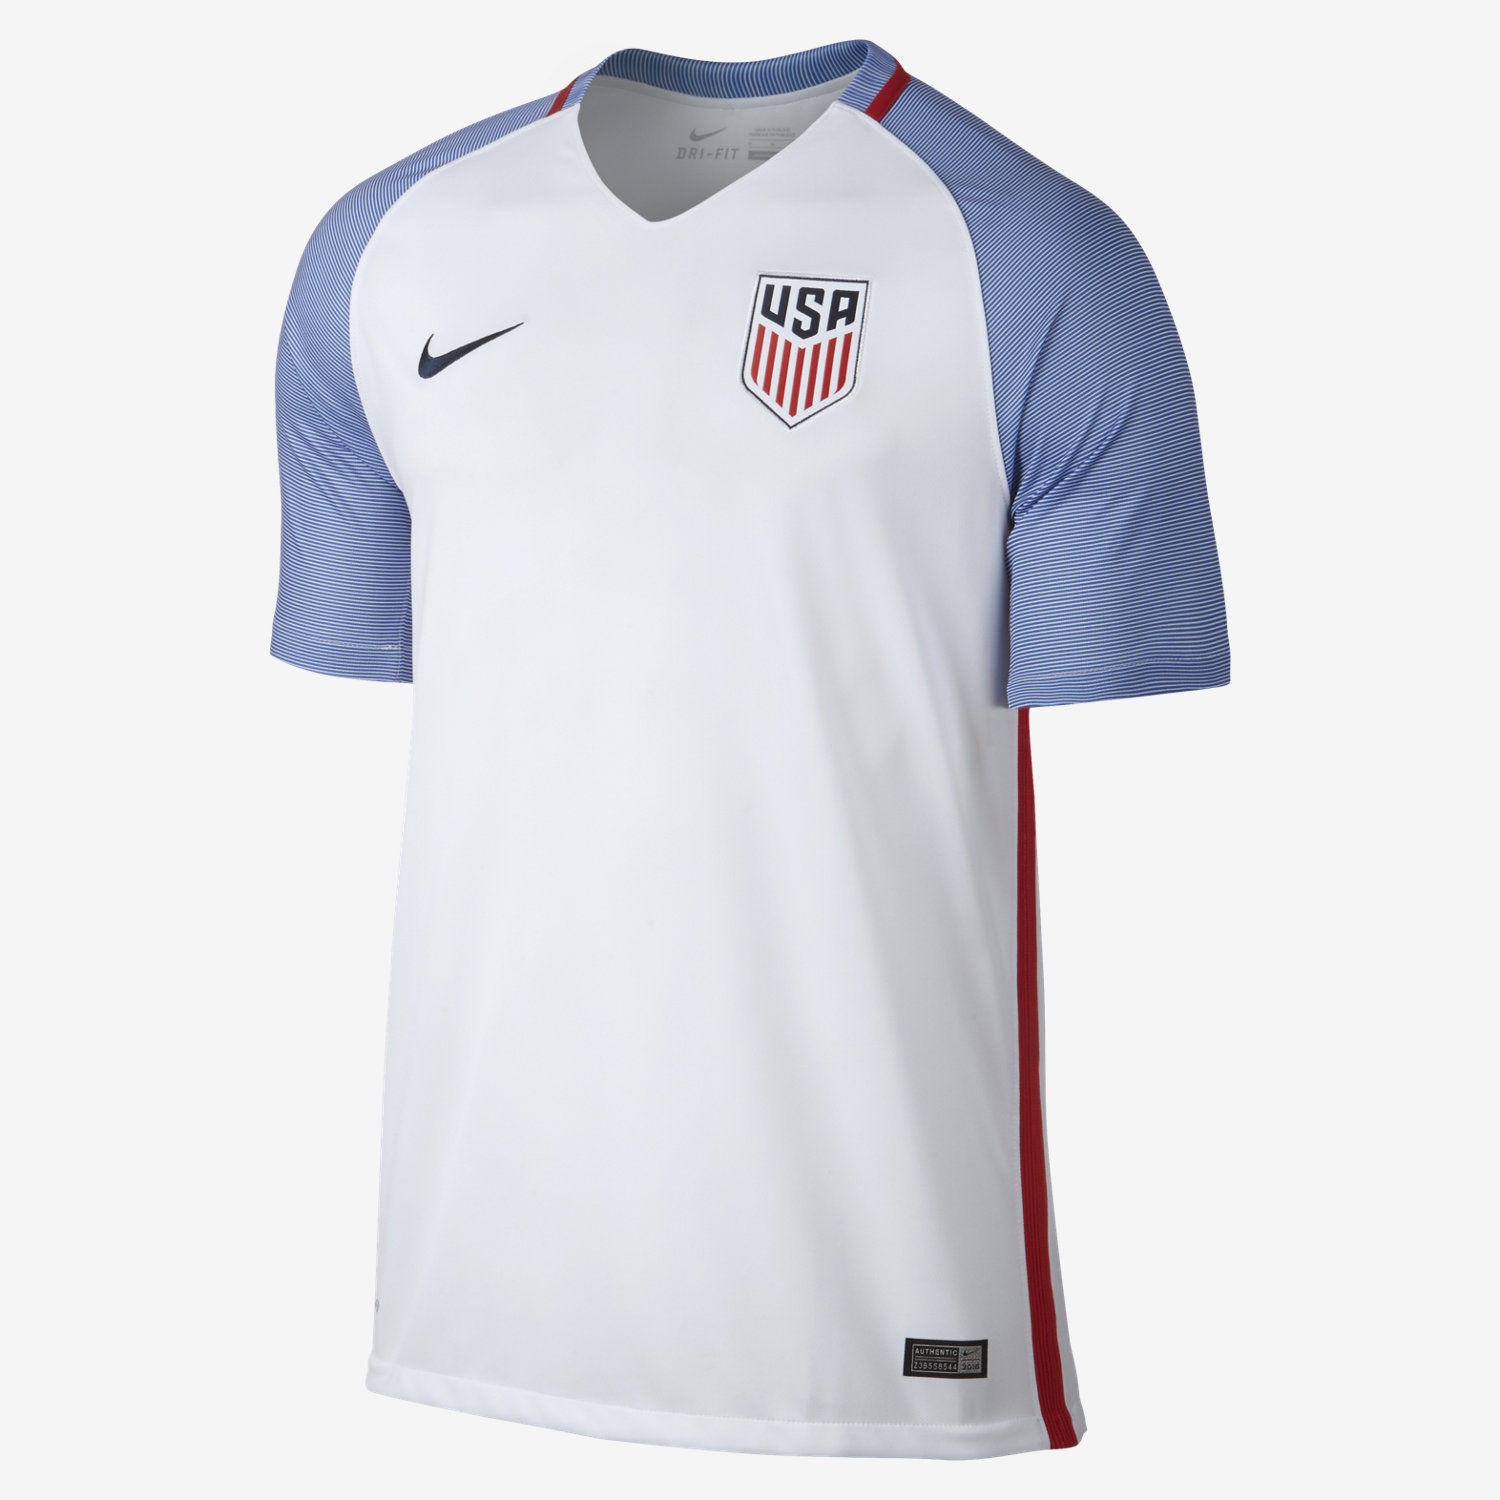 USA Home Jersey 2016-2017 Authentic Nike - $89.99